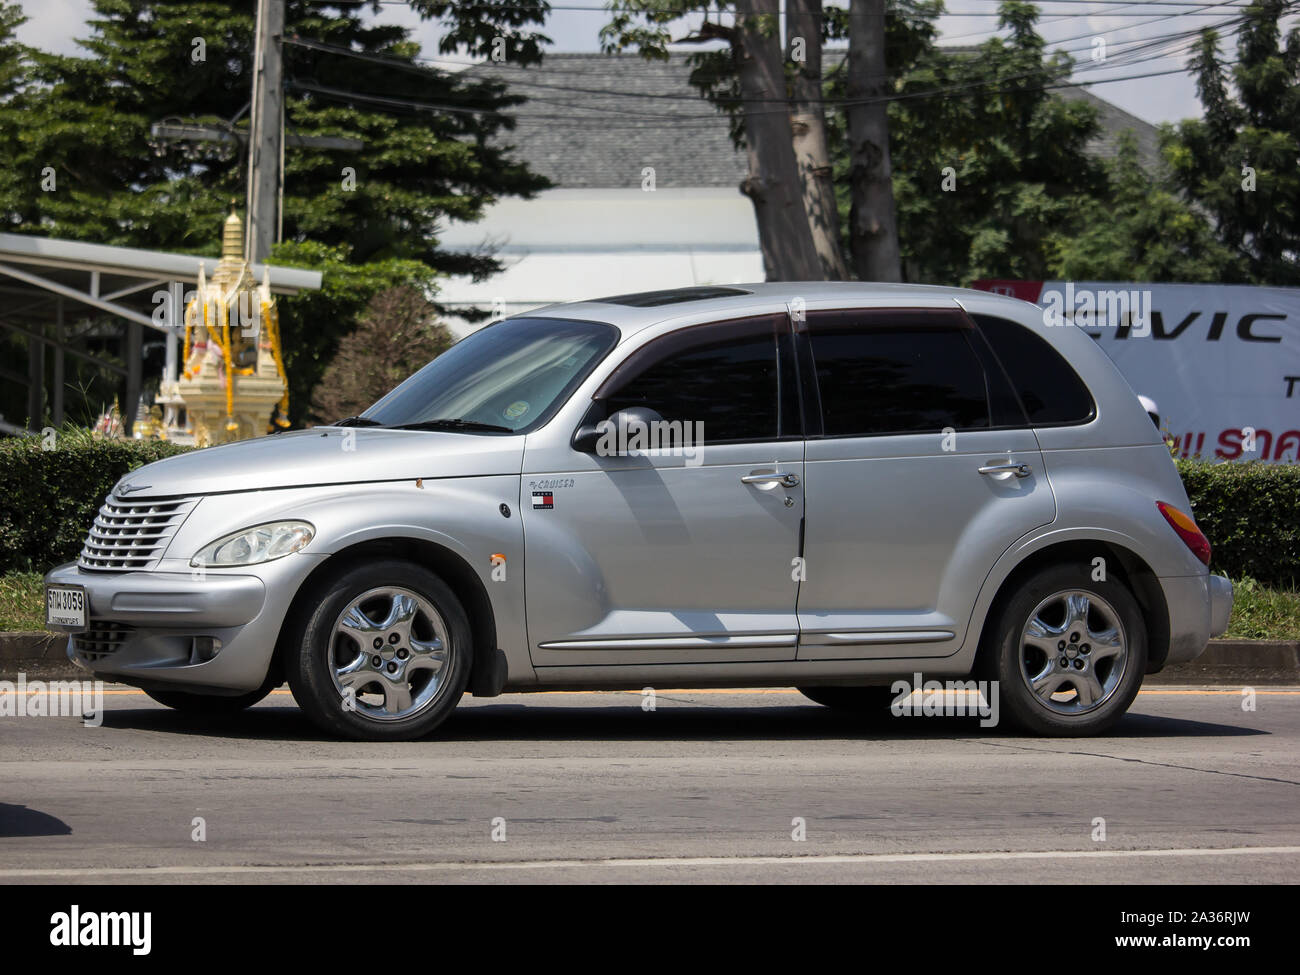 Chiangmai, Thailand -  October 3 2019: Private Chrysler PT Cruiser Car. Photo at road no 121 about 8 km from downtown Chiangmai, thailand. Stock Photo